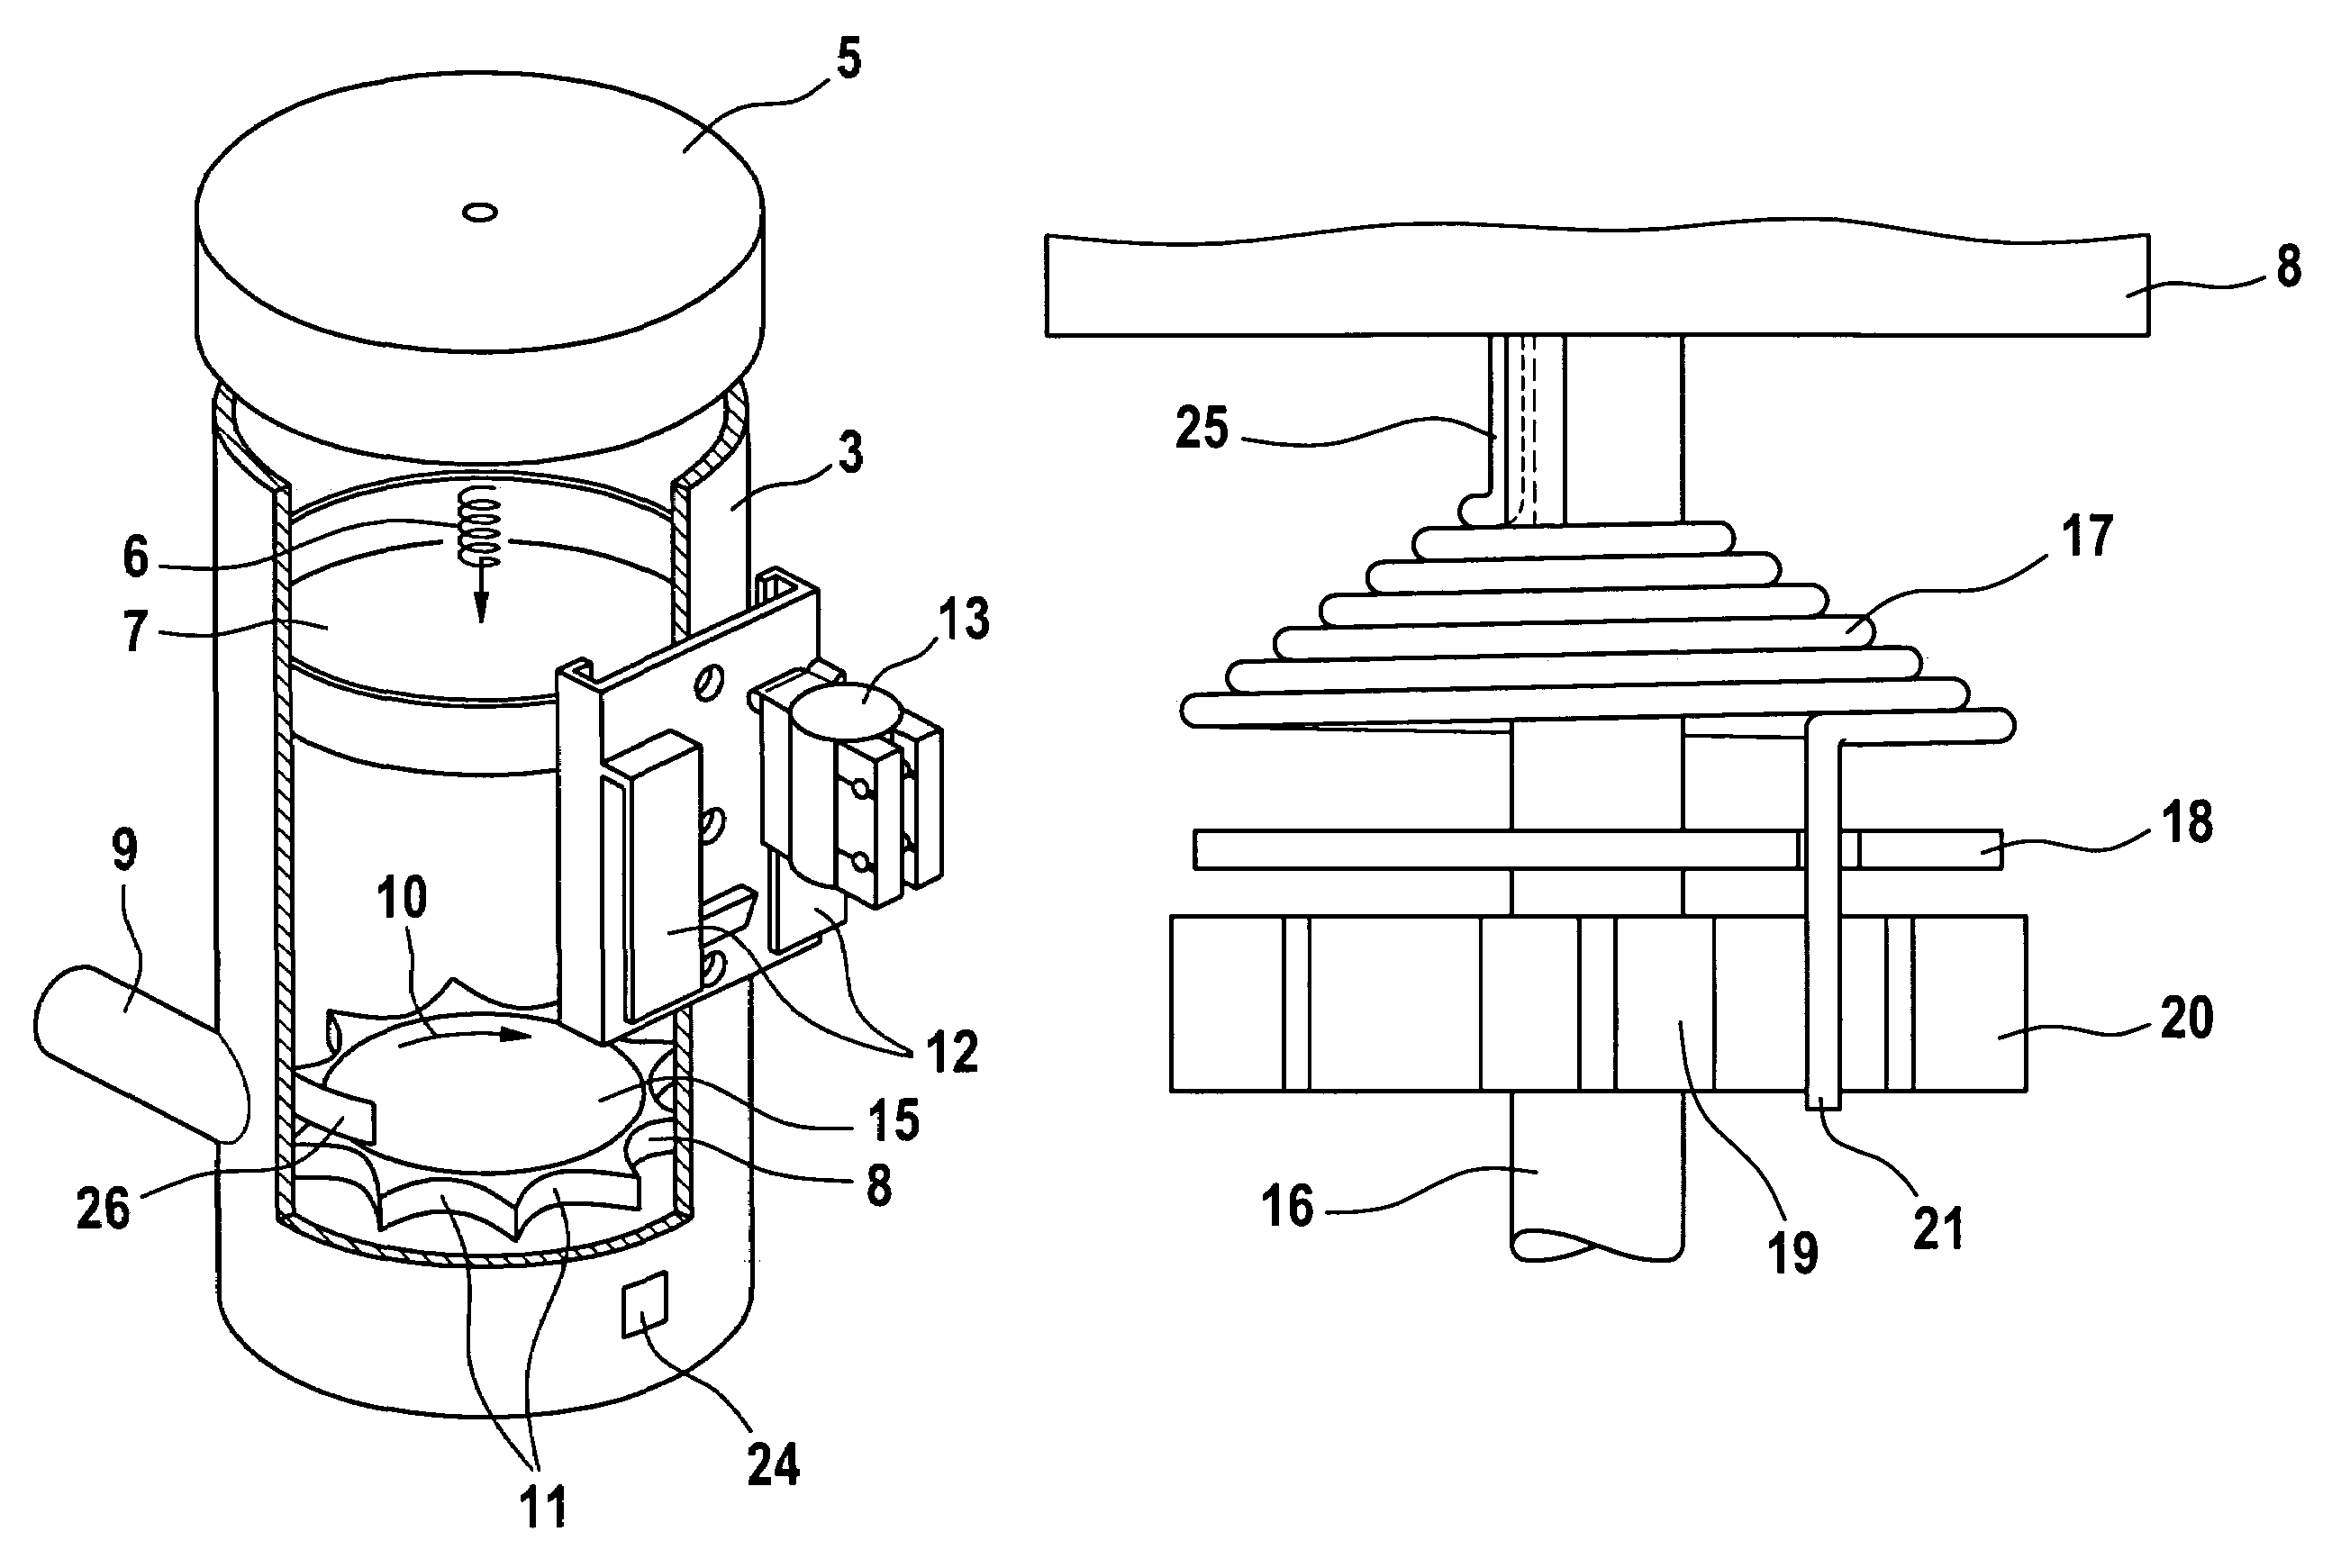 Device for storing projectile balls and feeding them into the projectile chamber of a hand gun